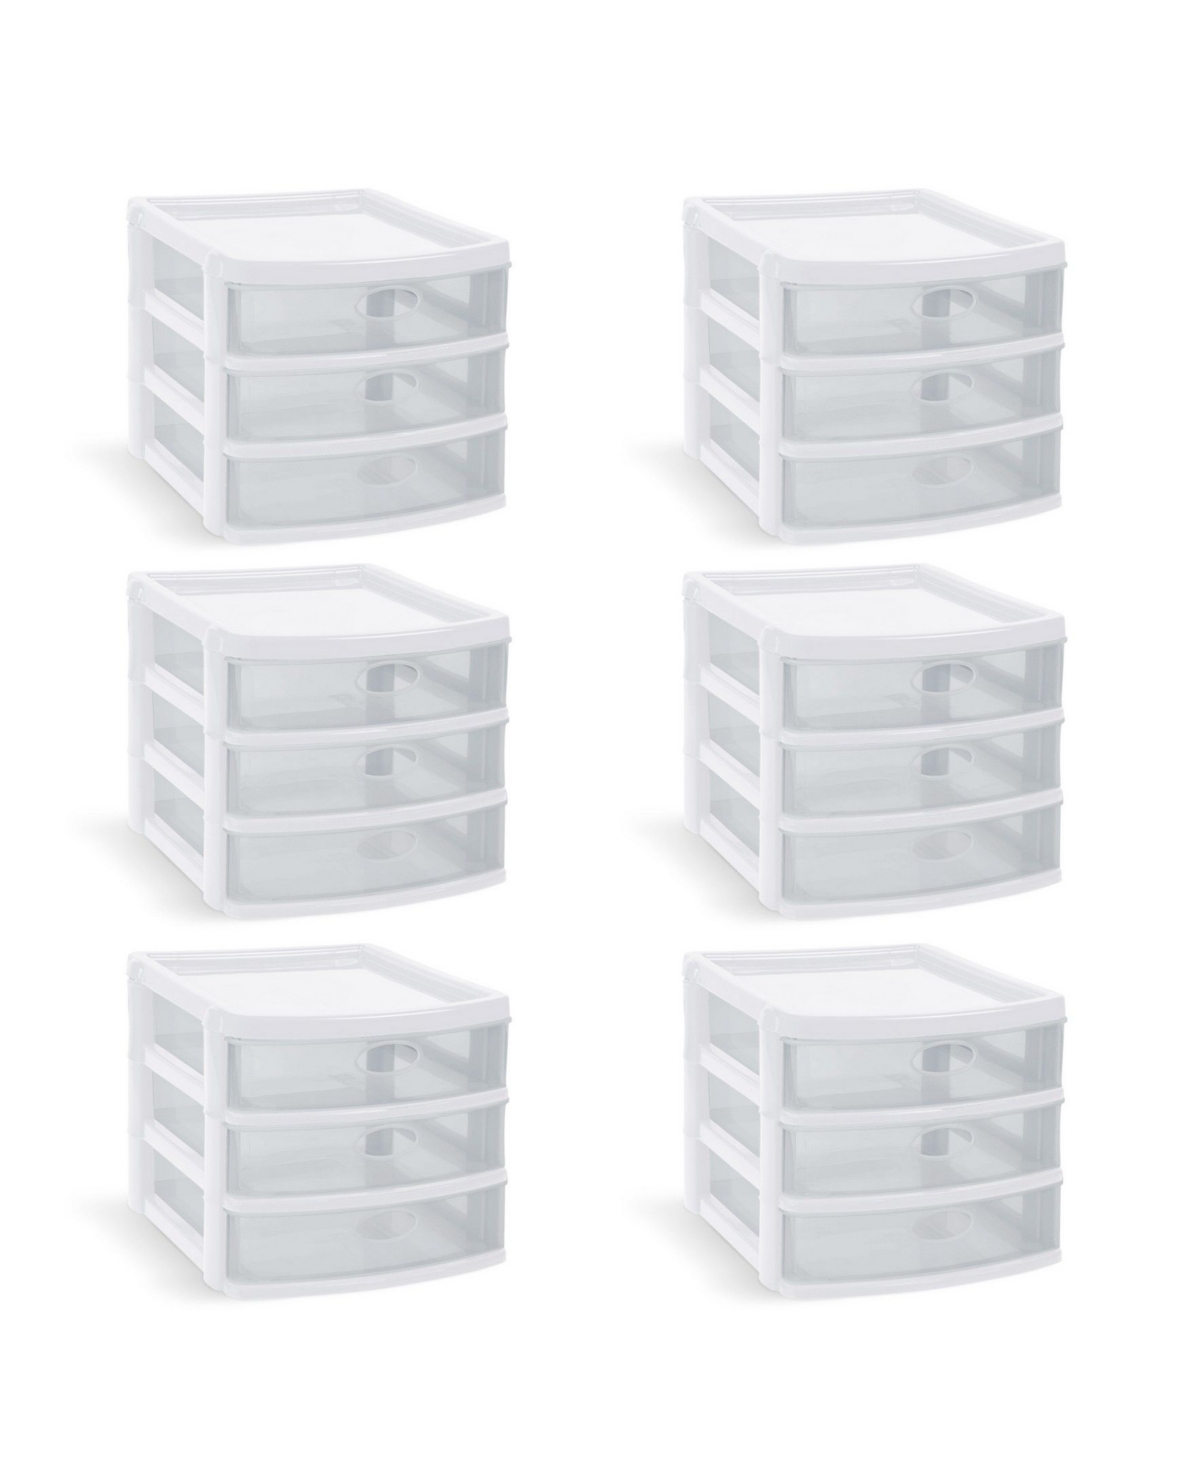 Mq 3-drawer Storage Unit With Clear Drawers, Pack Of 6 In White